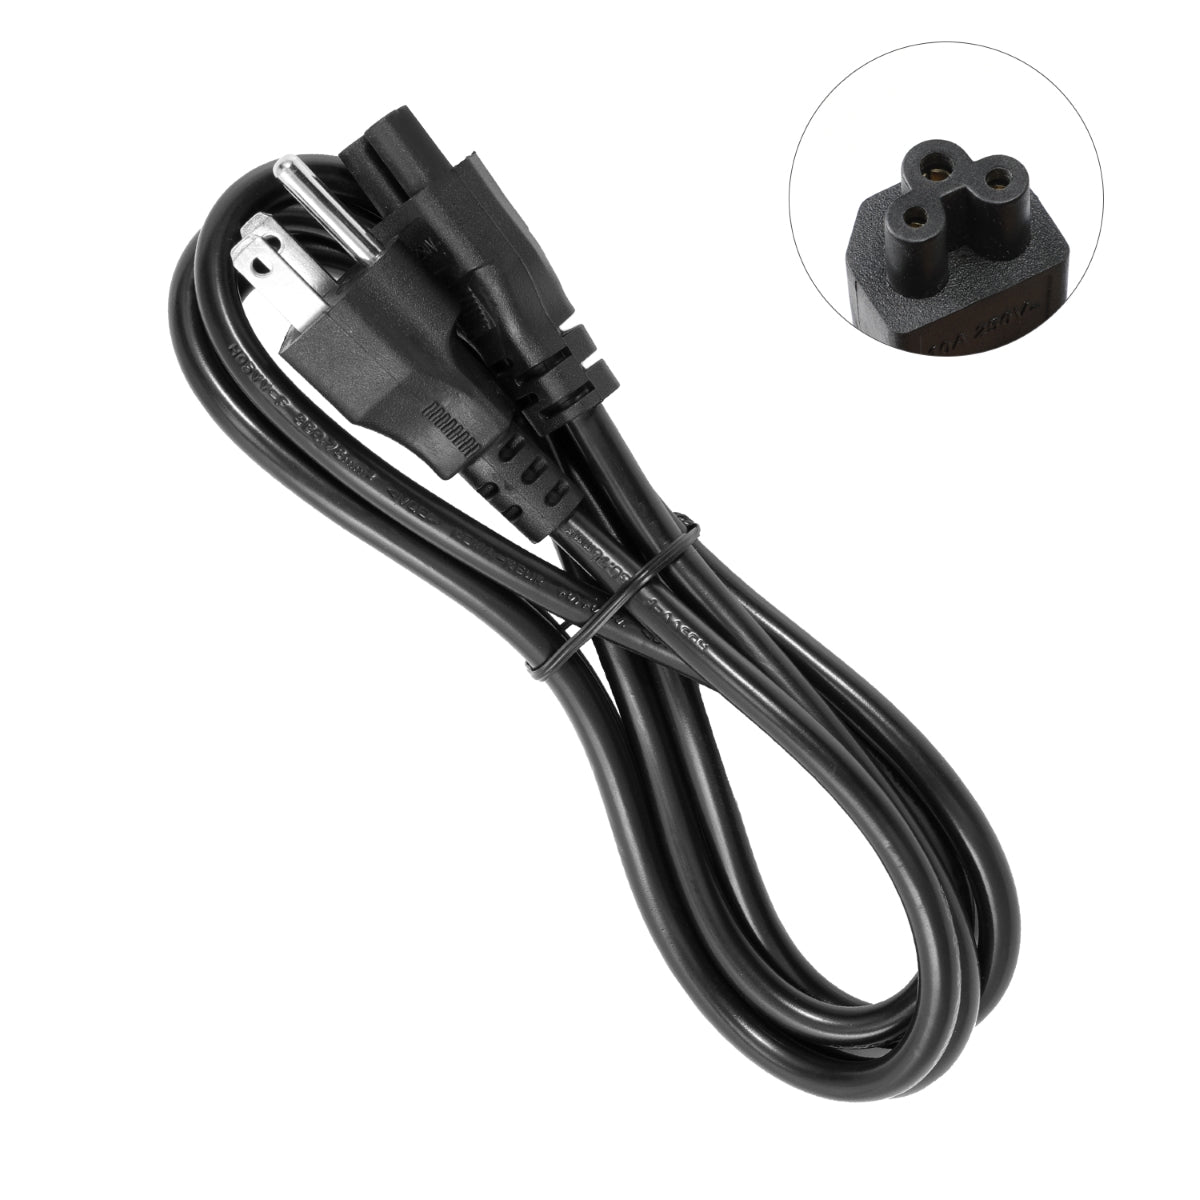 Power Cord for LG 42LF5600 Monitor.